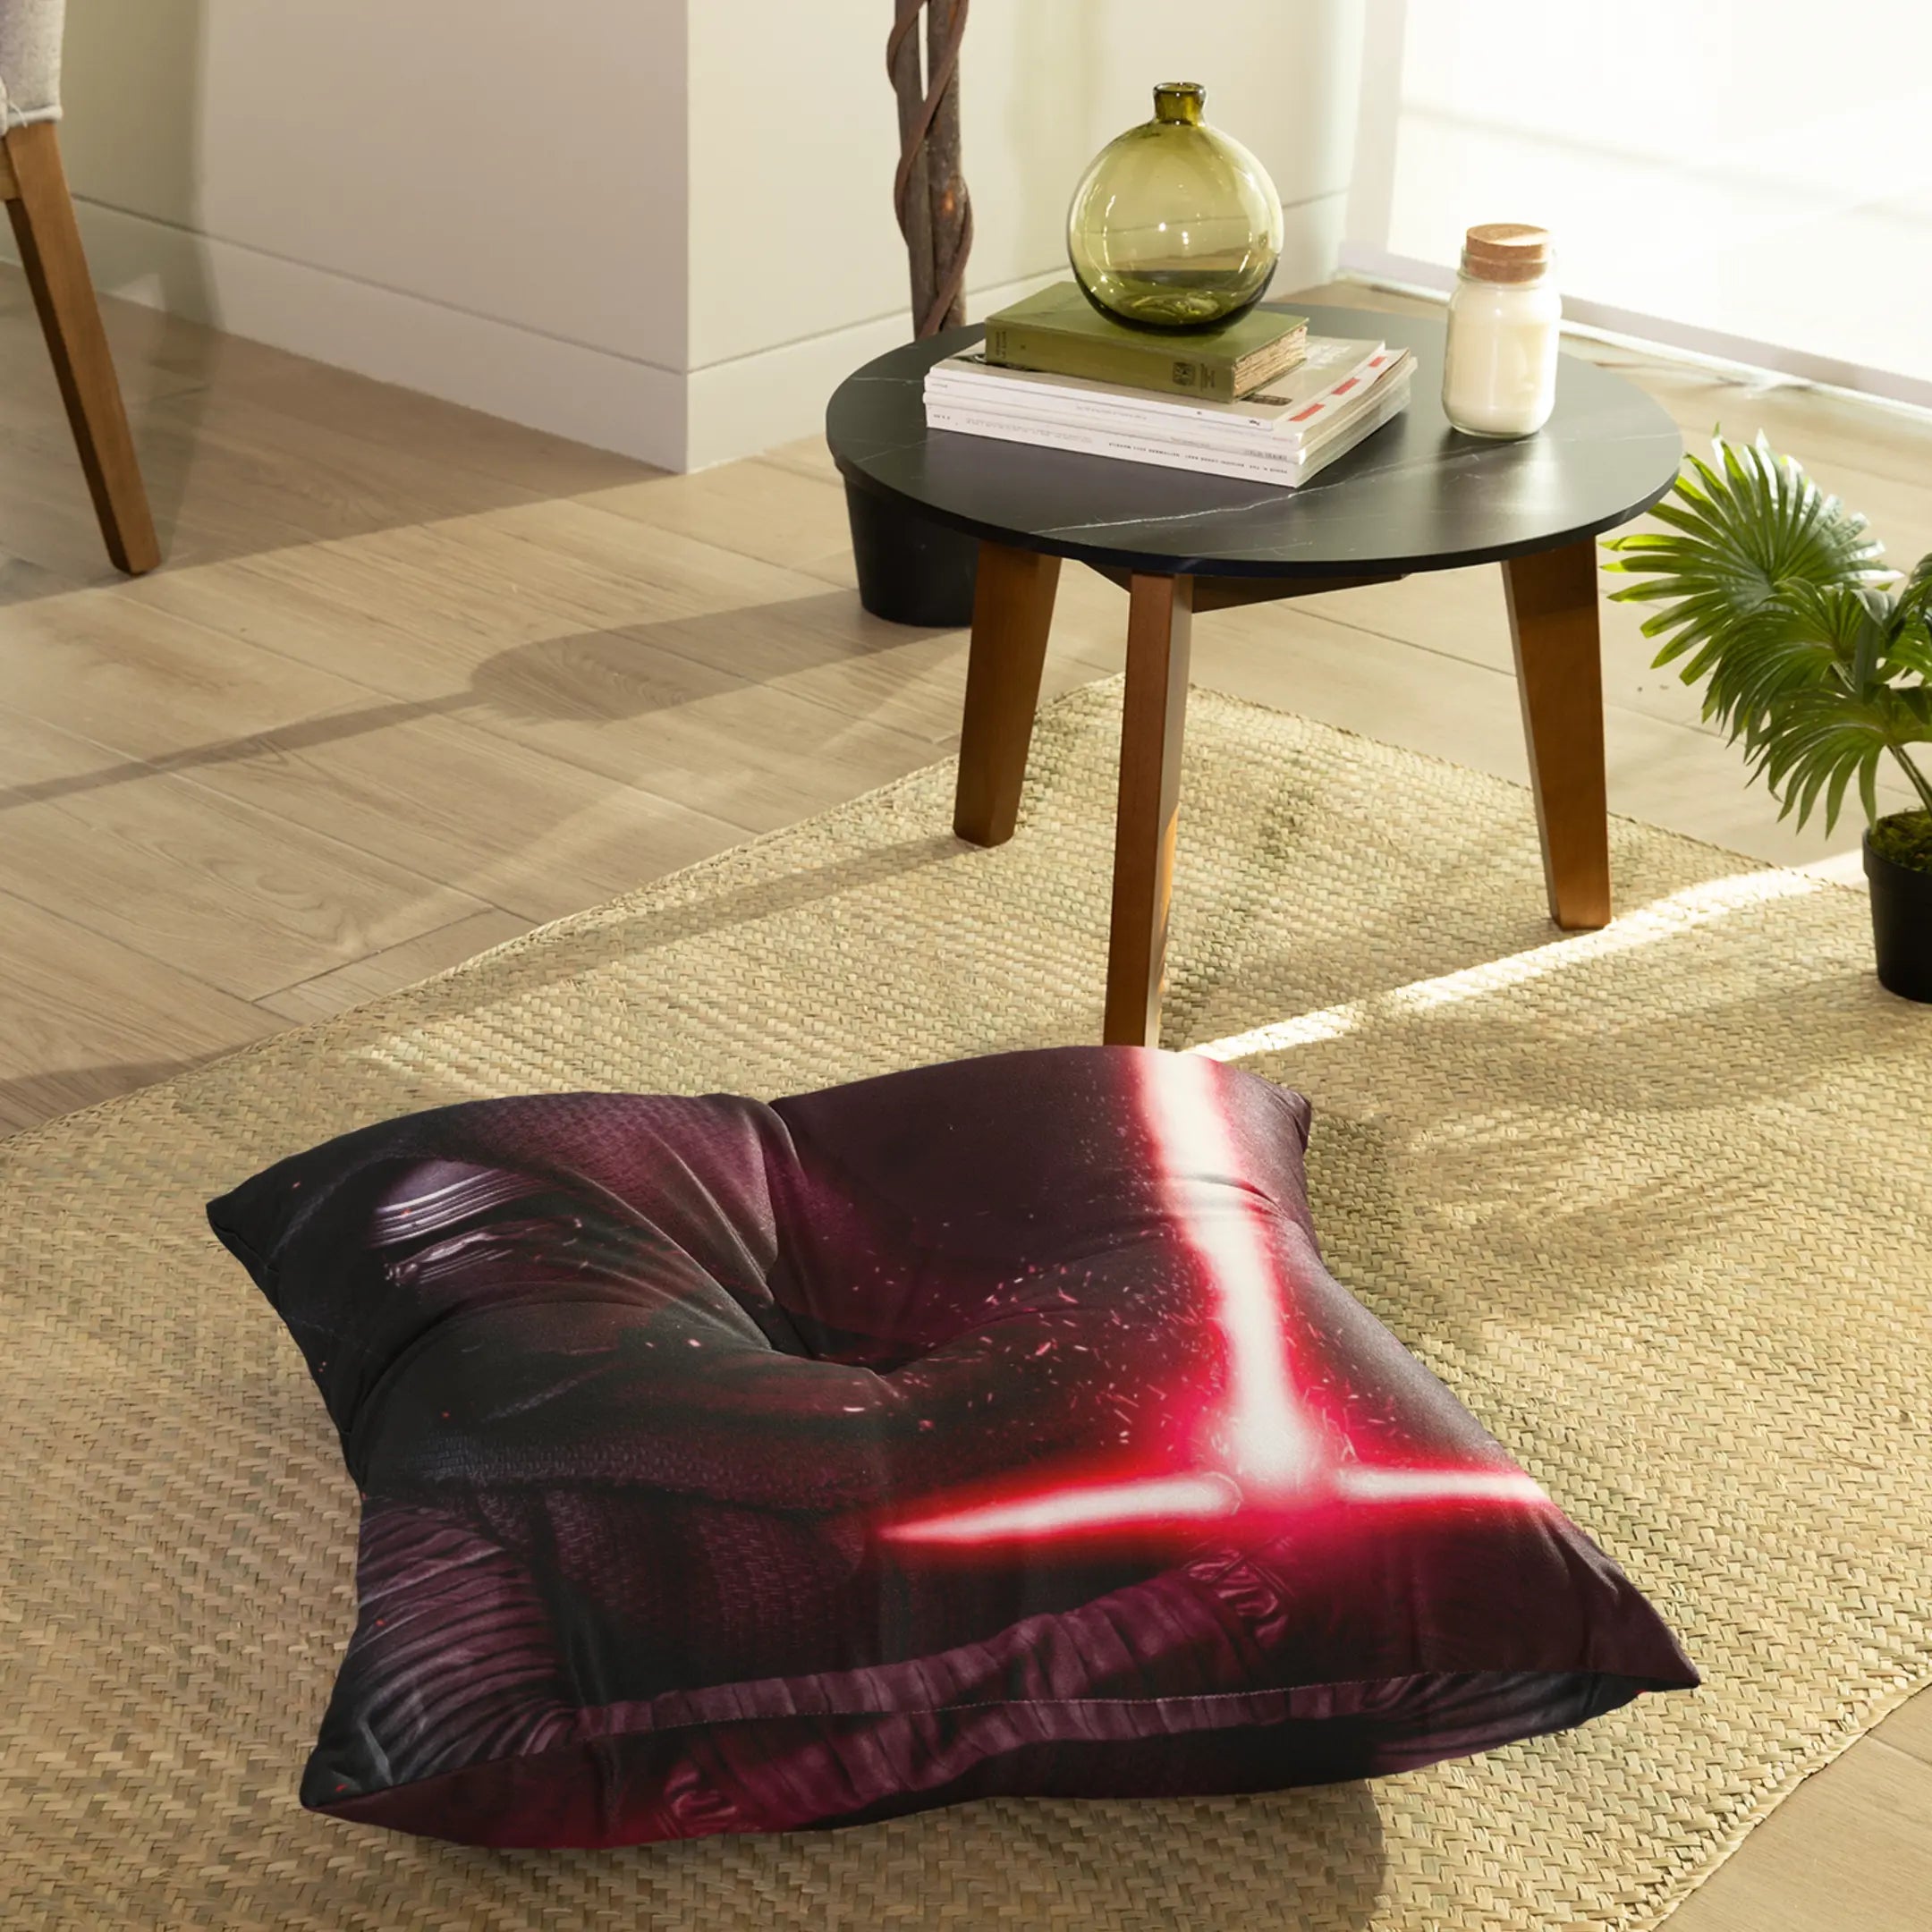 Coussin Star Wars